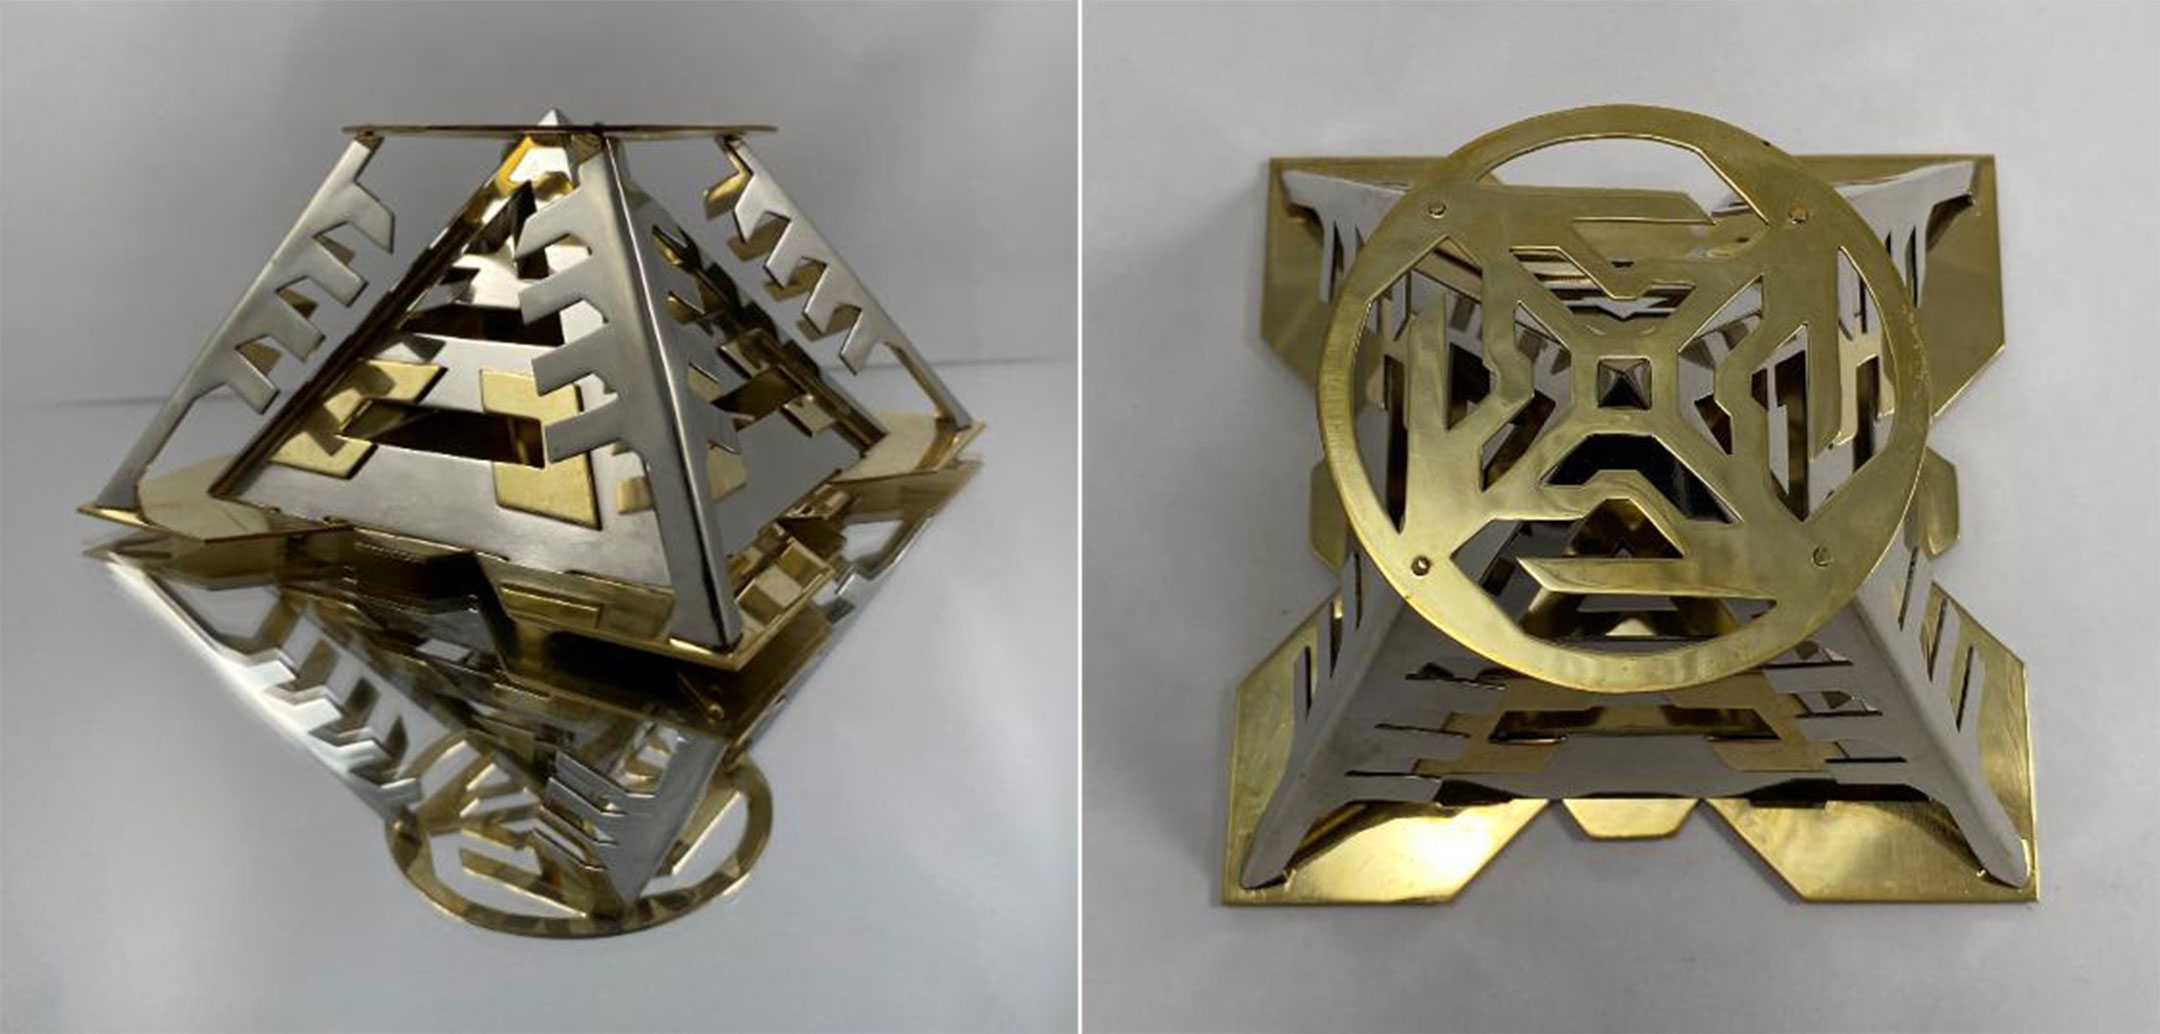 Two photographs of a metal sculpture in the shape of a pyramid, with the image on the left showing the sculpture from the side and the image on the right showing it from overhead